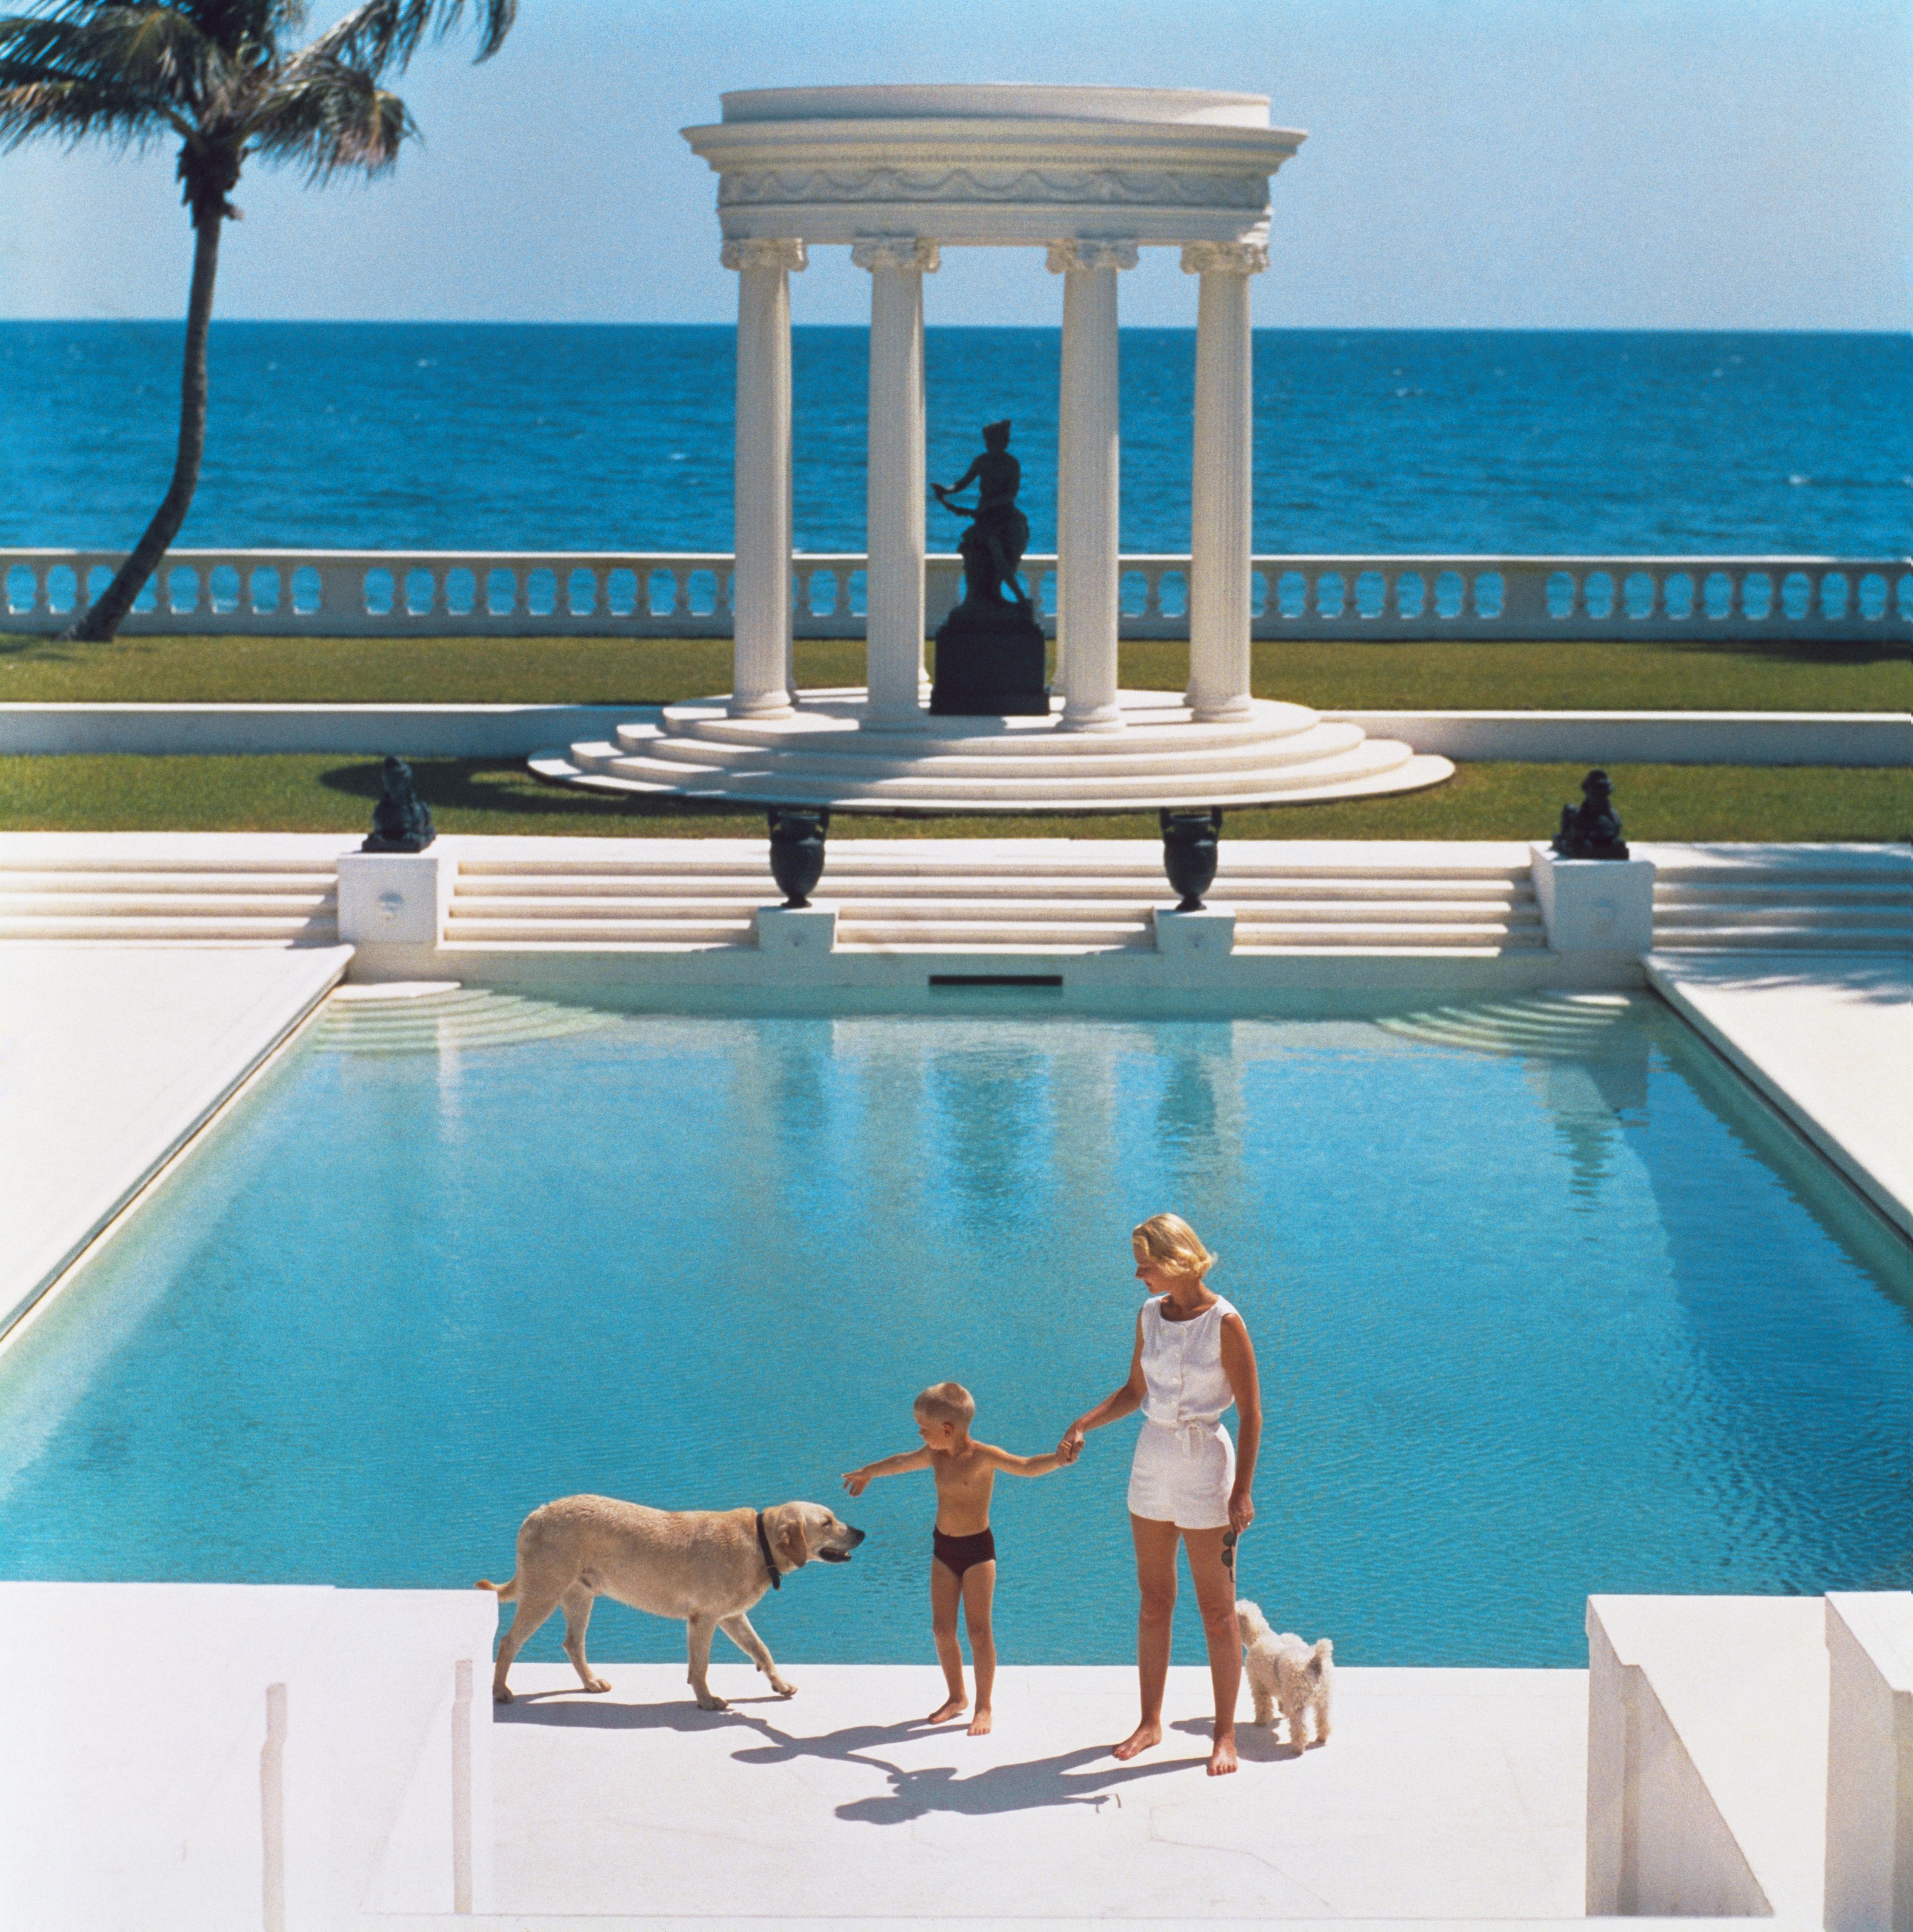 'Nice Pool' 1955 Slim Aarons Limited Edition Estate Stamped Print
1955. American writer C.Z. Guest (Mrs. F.C. Winston Guest, 1920 – 2003) and her son Alexander Michael Douglas Dudley Guest in front of their Grecian temple pool on the ocean-front